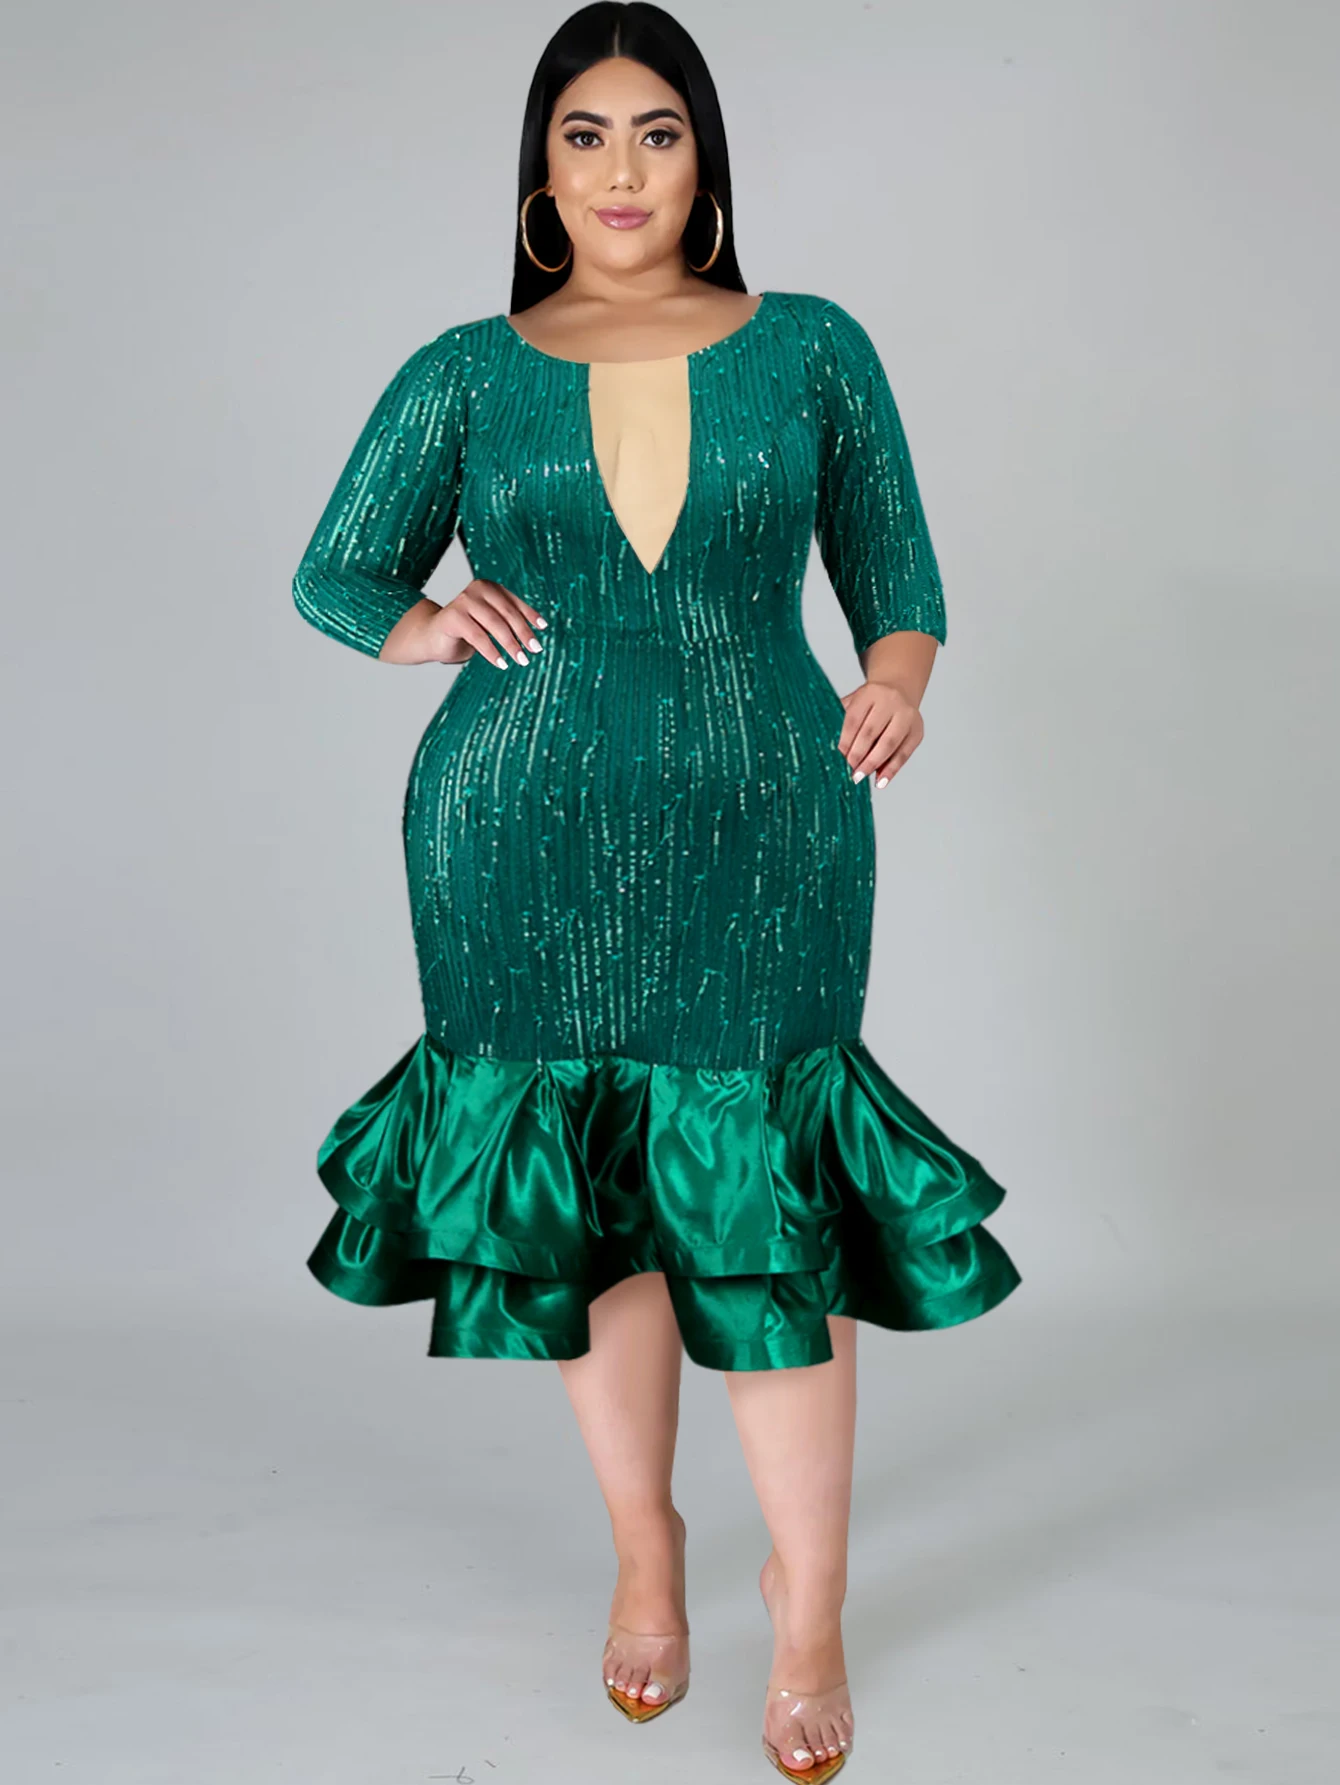 plus-size-4xl-women-luxury-sequined-evening-party-dress-green-gliter-long-sleeve-slim-tiered-ruffled-hem-prom-wedding-guest-gown